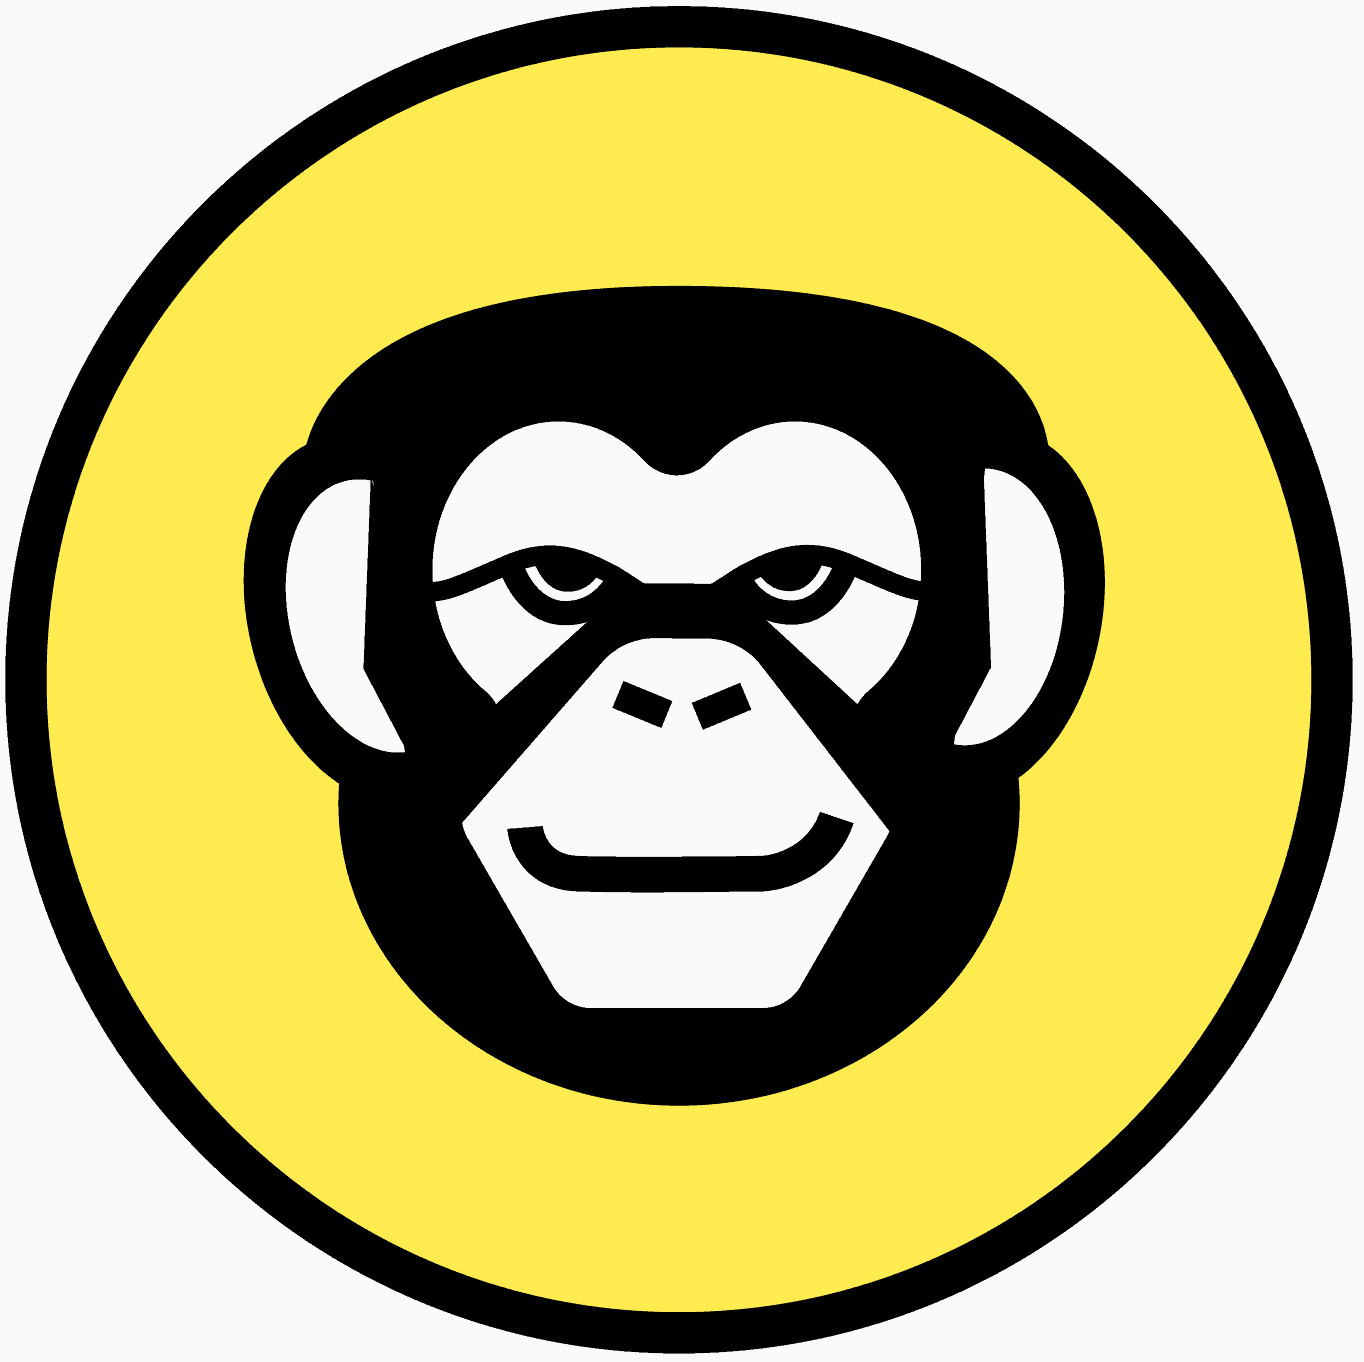 A simple black and white illustration of a chimpanzee's face centered within a bright yellow circle.